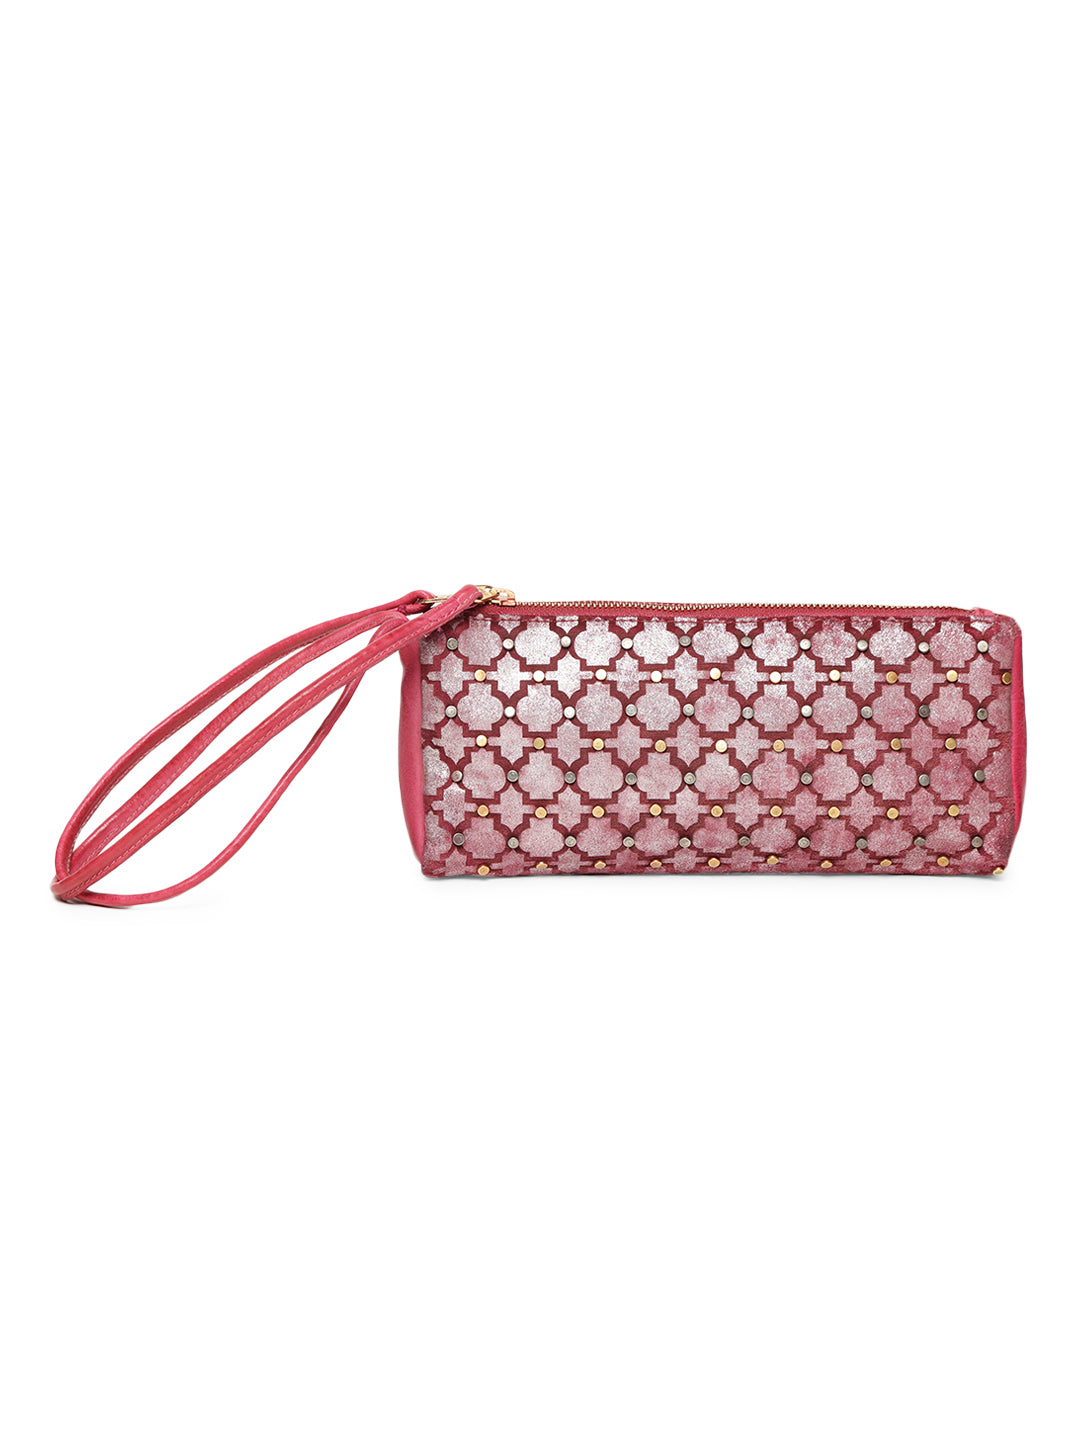 LUMINOSA: Red Leather clutch Bag By Art N Vintage